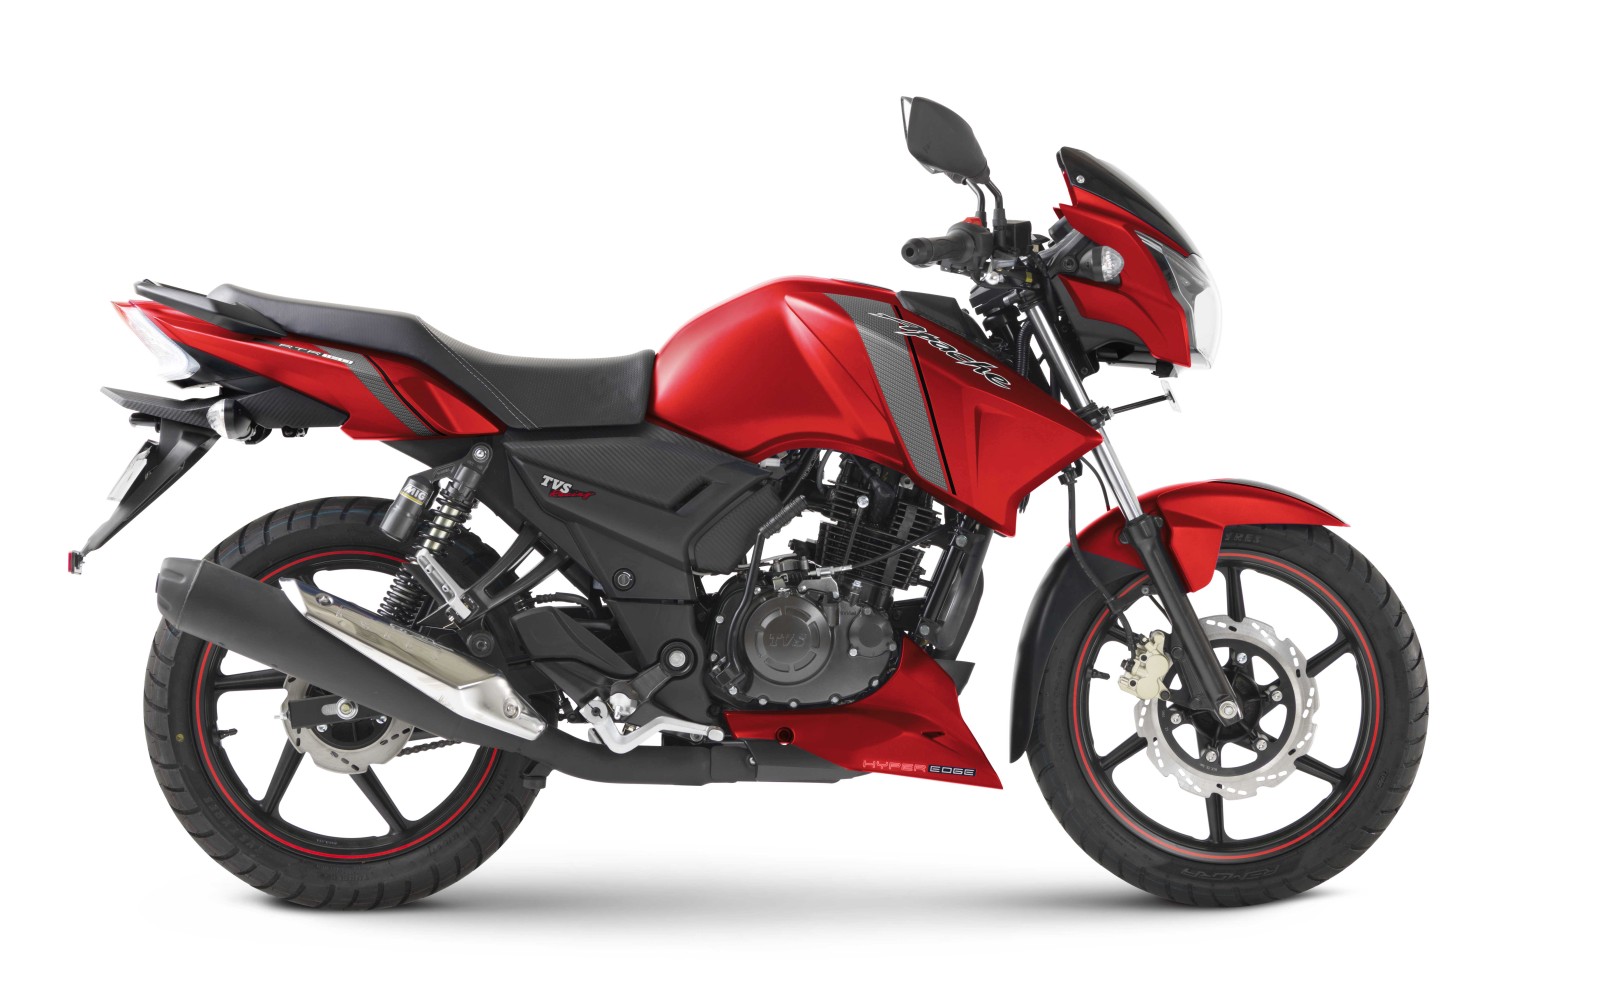 Tvs Apache Rtr 160 And Rtr 180 Now Available In New Syrah Matte